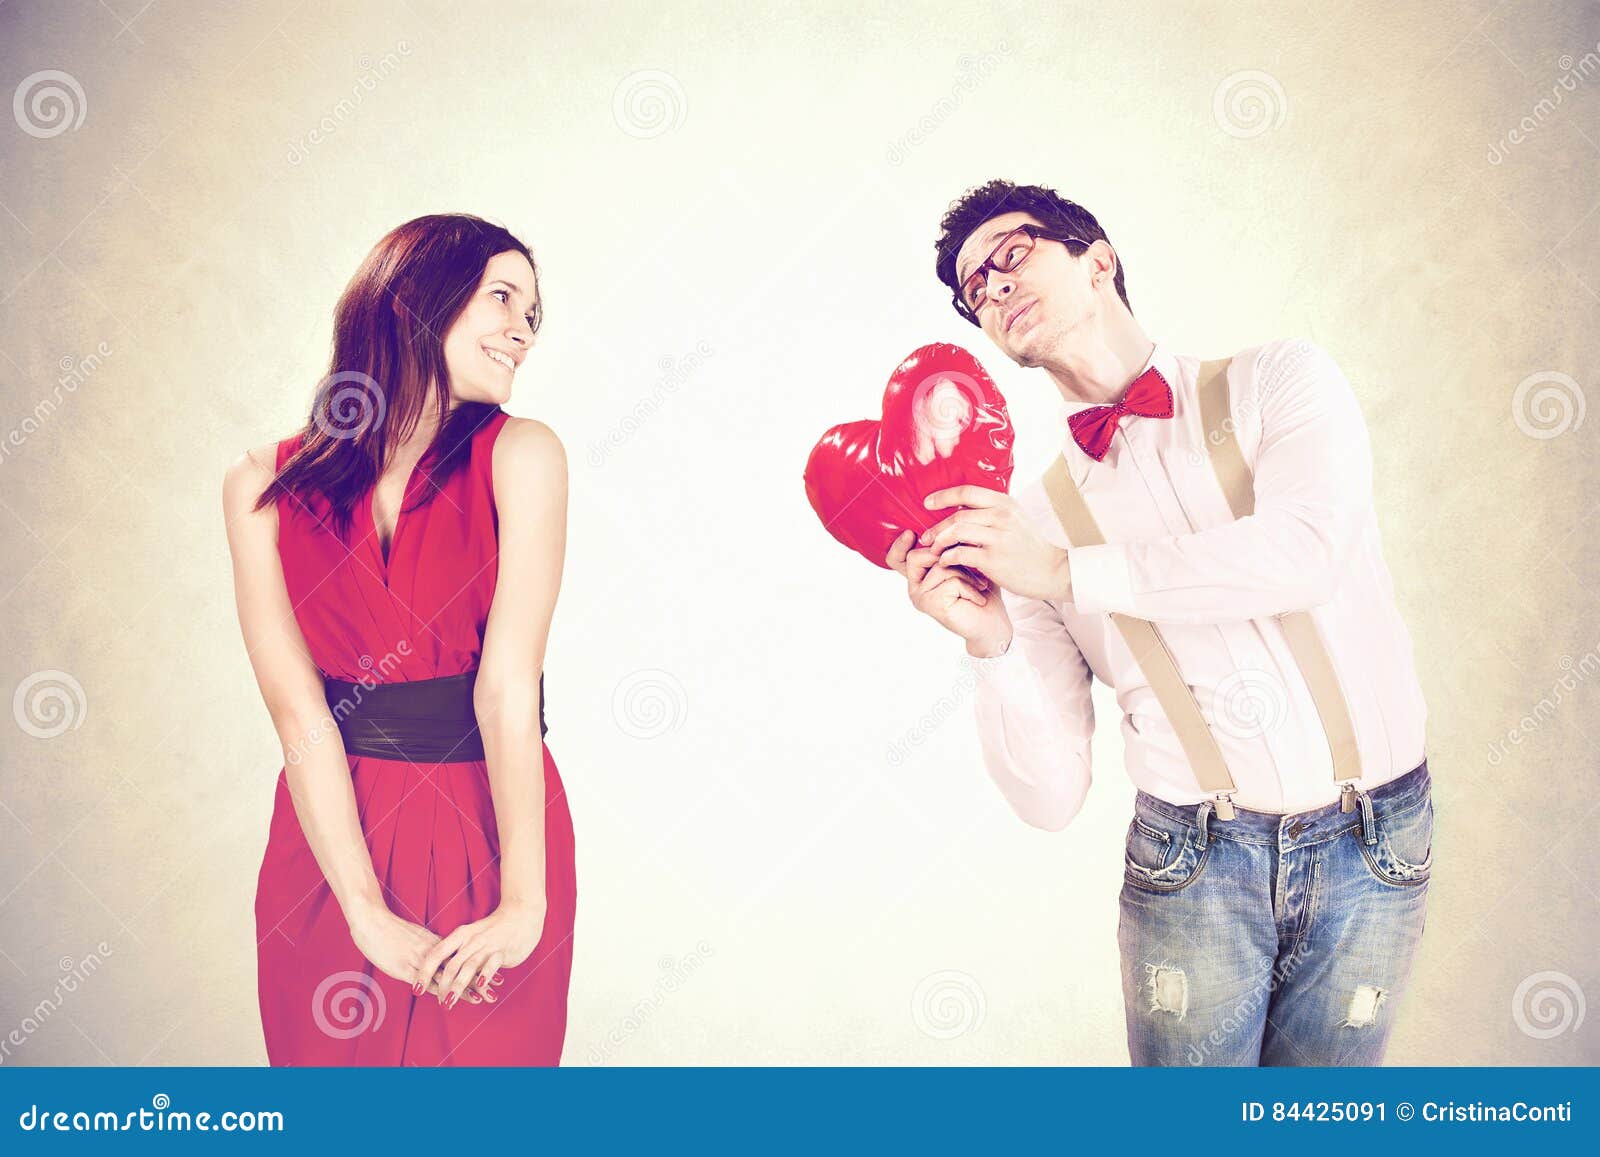 Romantic Boy Gives a Heart To His Girlfriend in Valentine?s Day ...